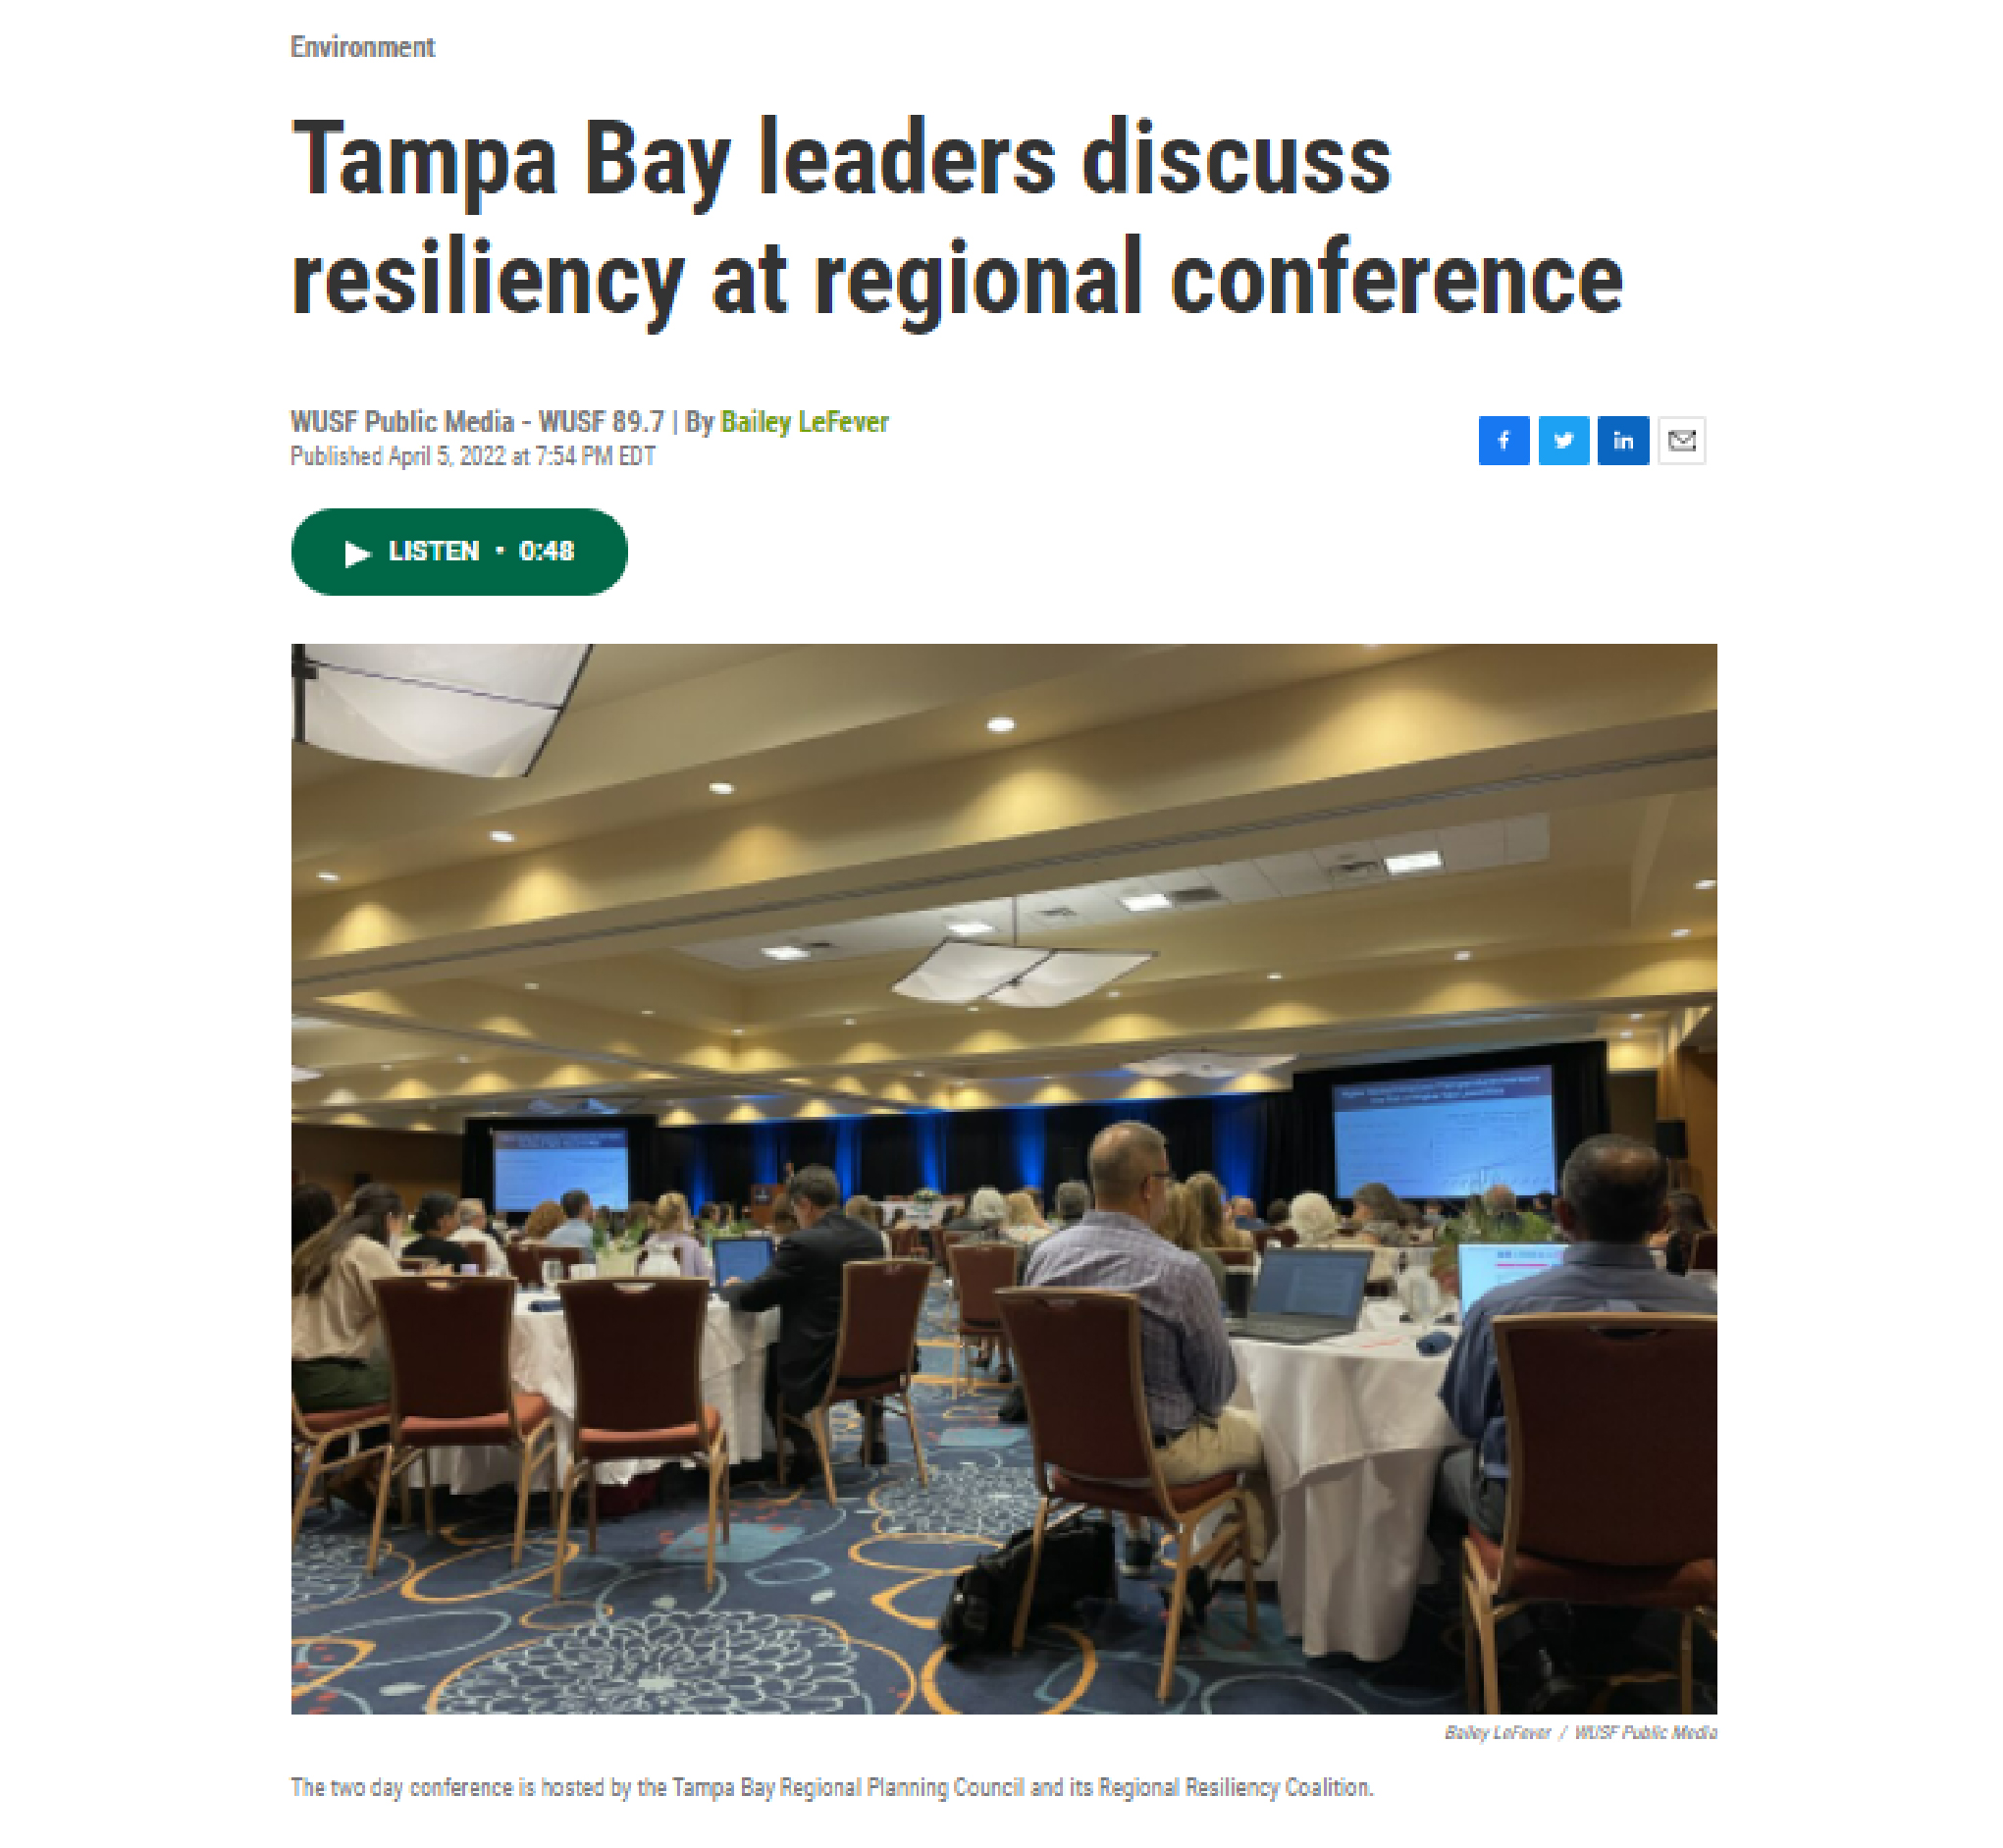 Tampa Bay leaders discuss resiliency at regional conference